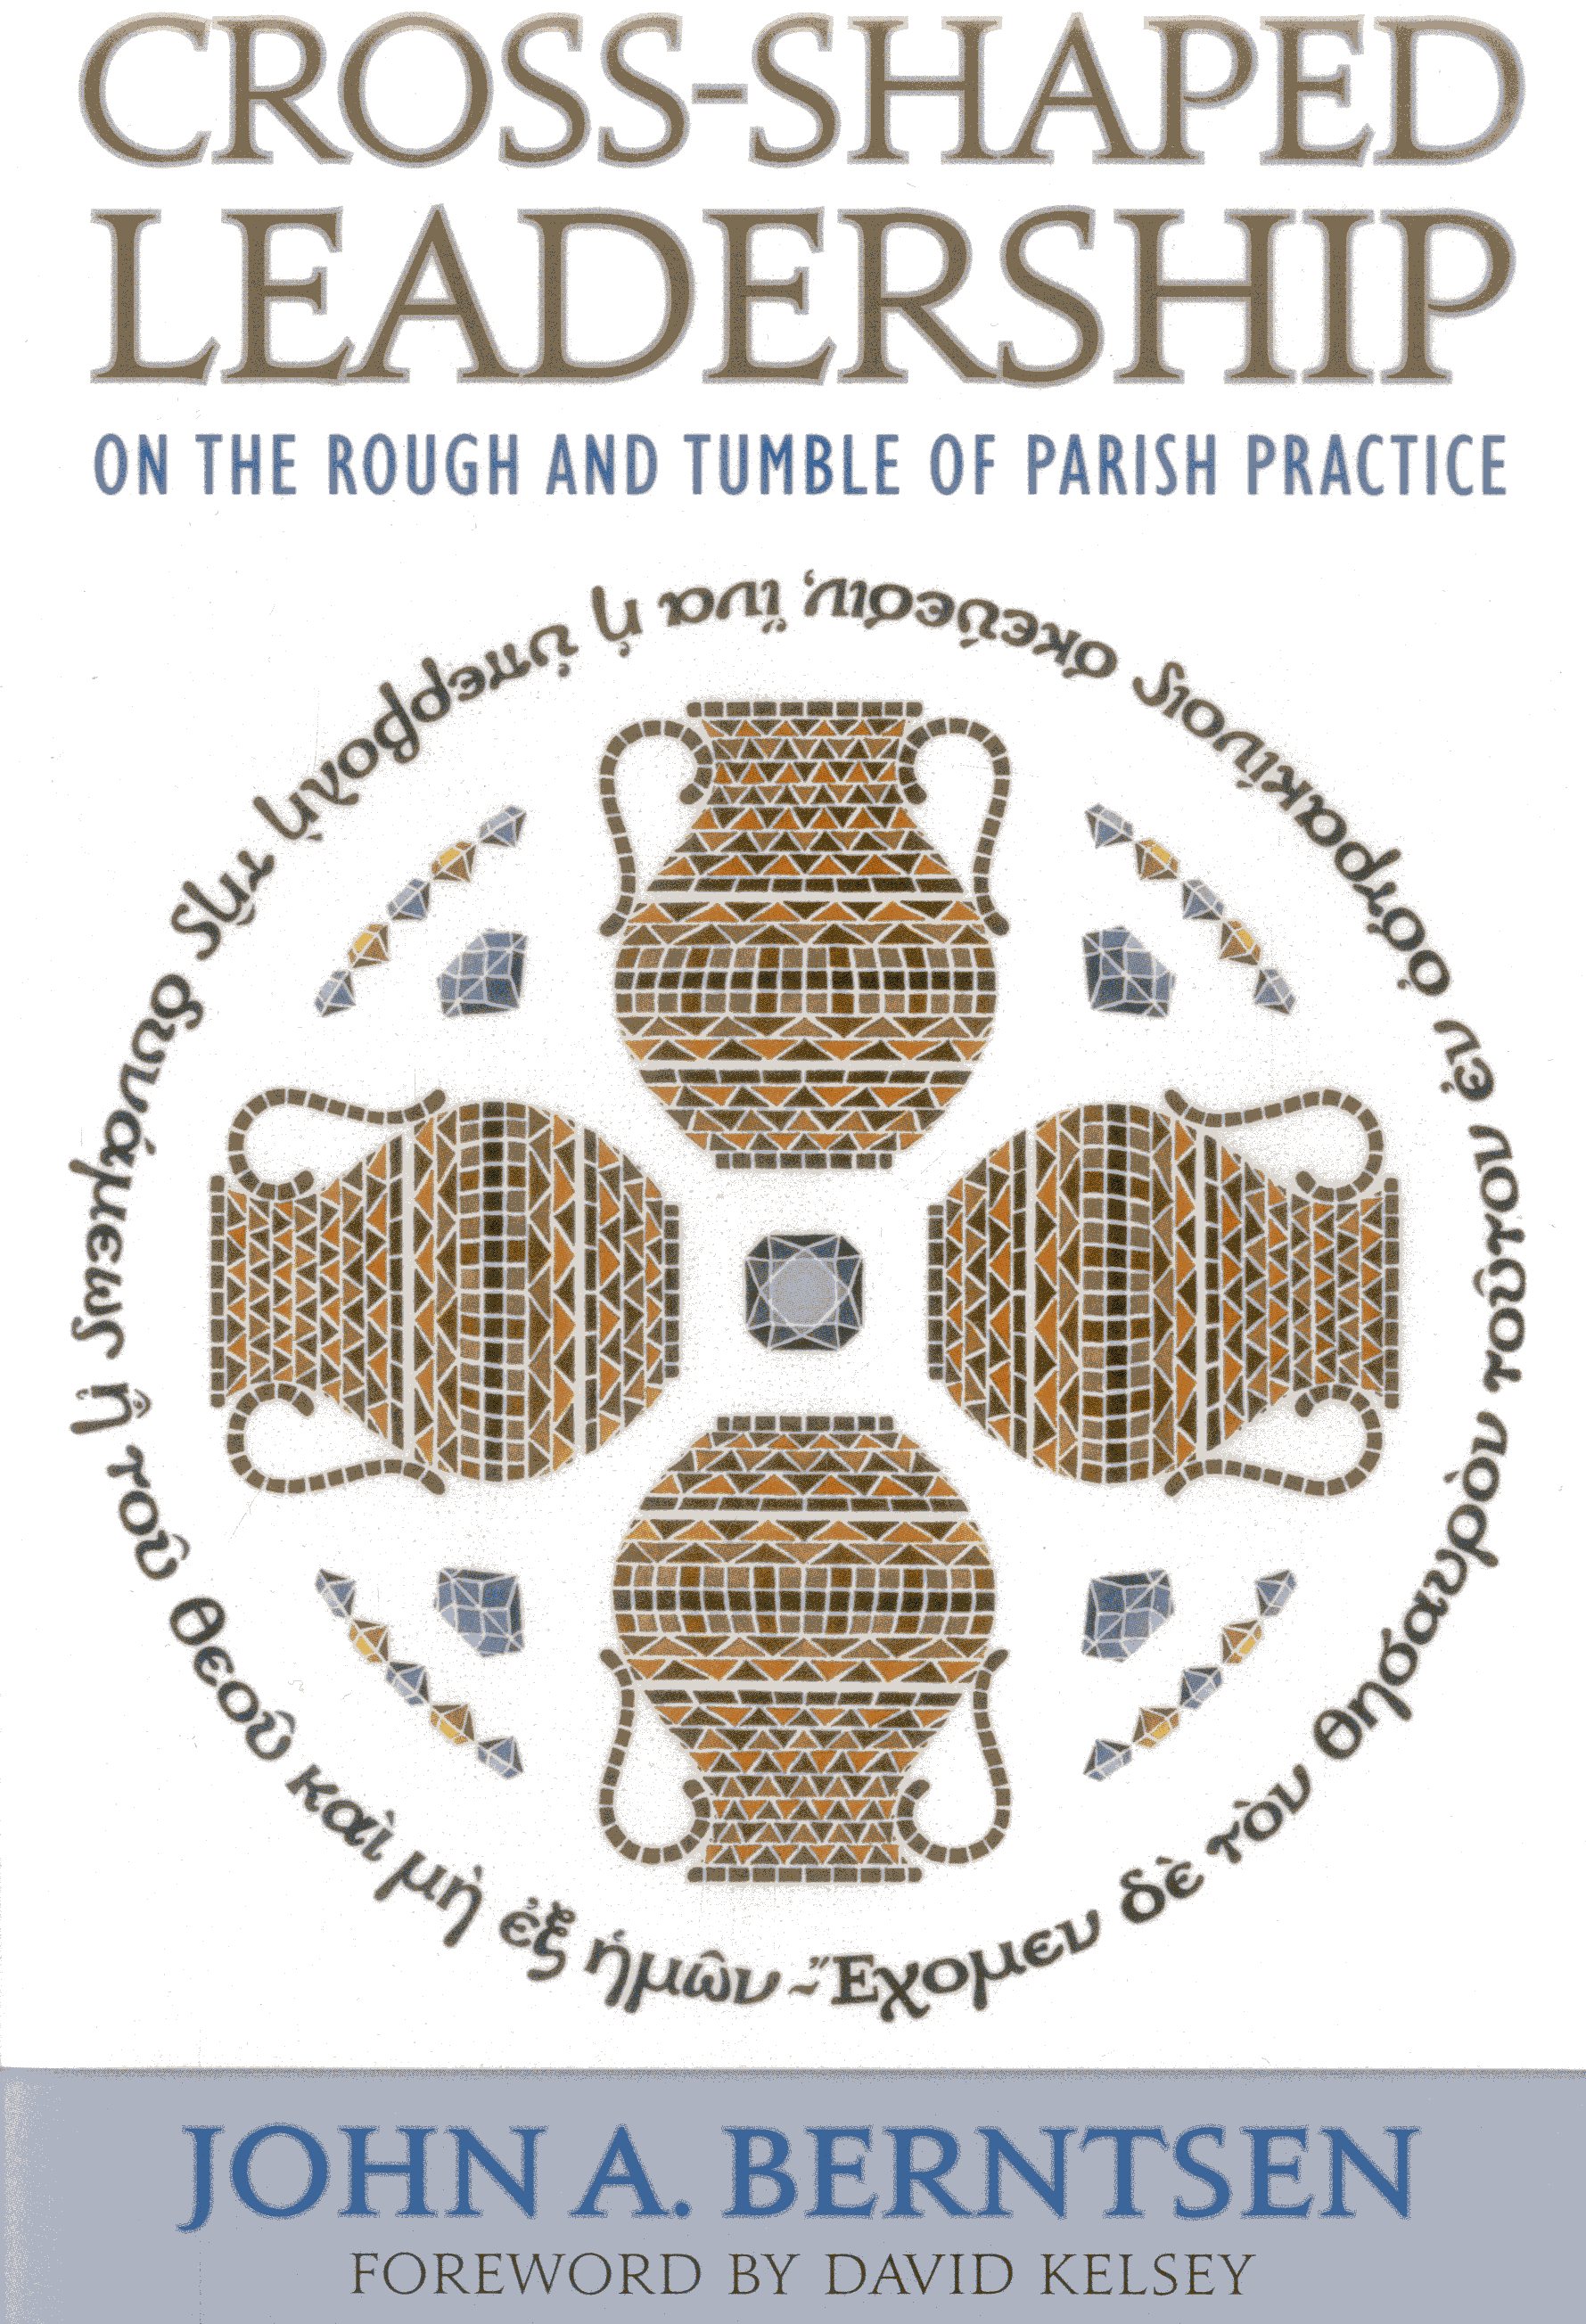 Cross-Shaped Leadership: On the Rough and Tumble of Parish Practice